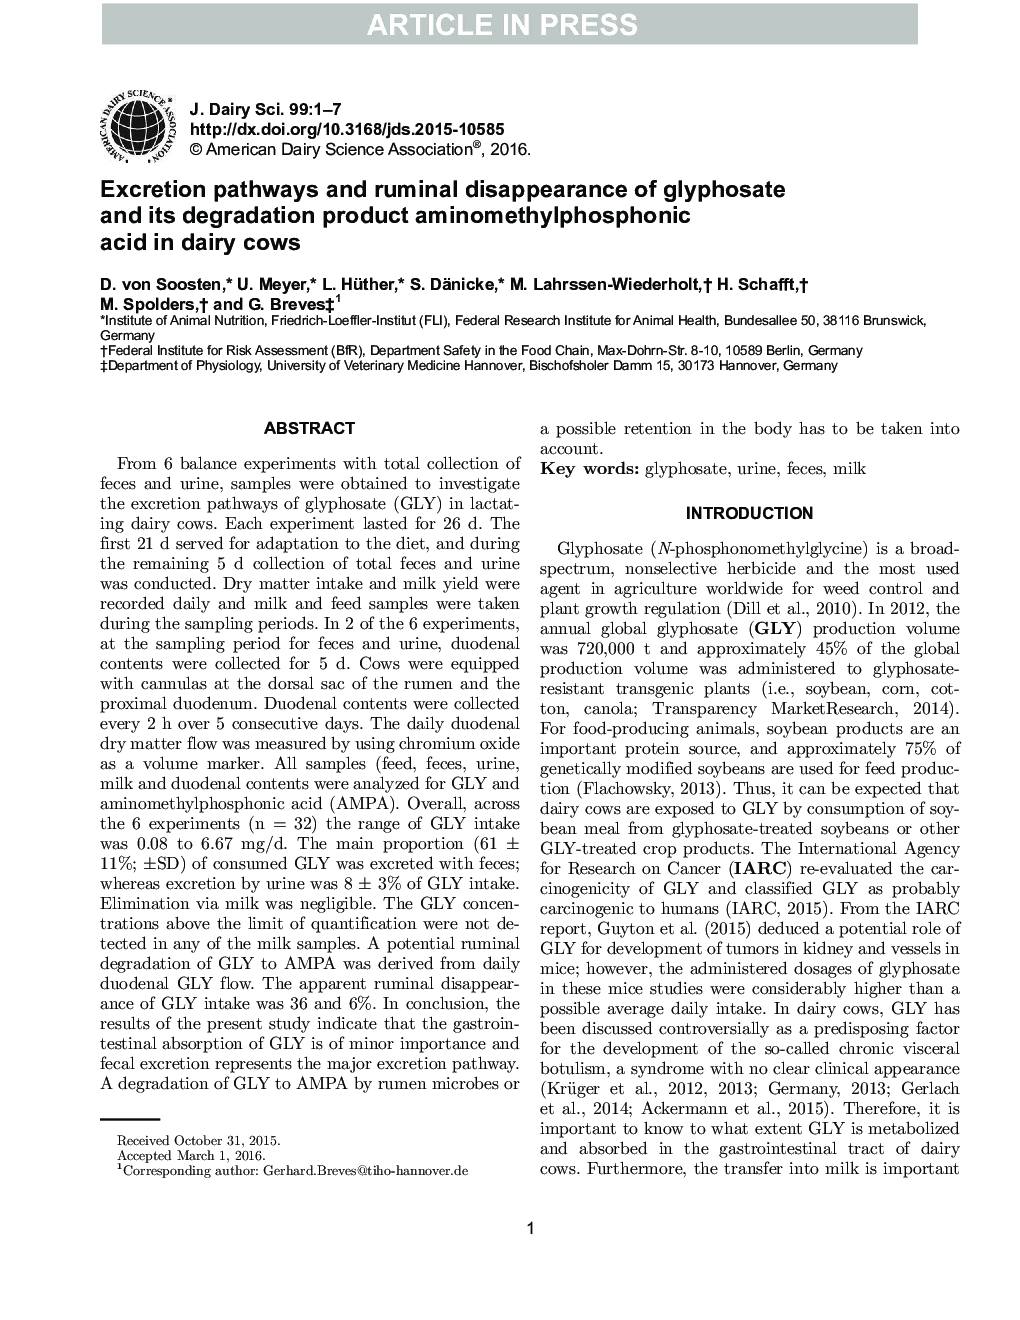 Excretion pathways and ruminal disappearance of glyphosate and its degradation product aminomethylphosphonic acid in dairy cows